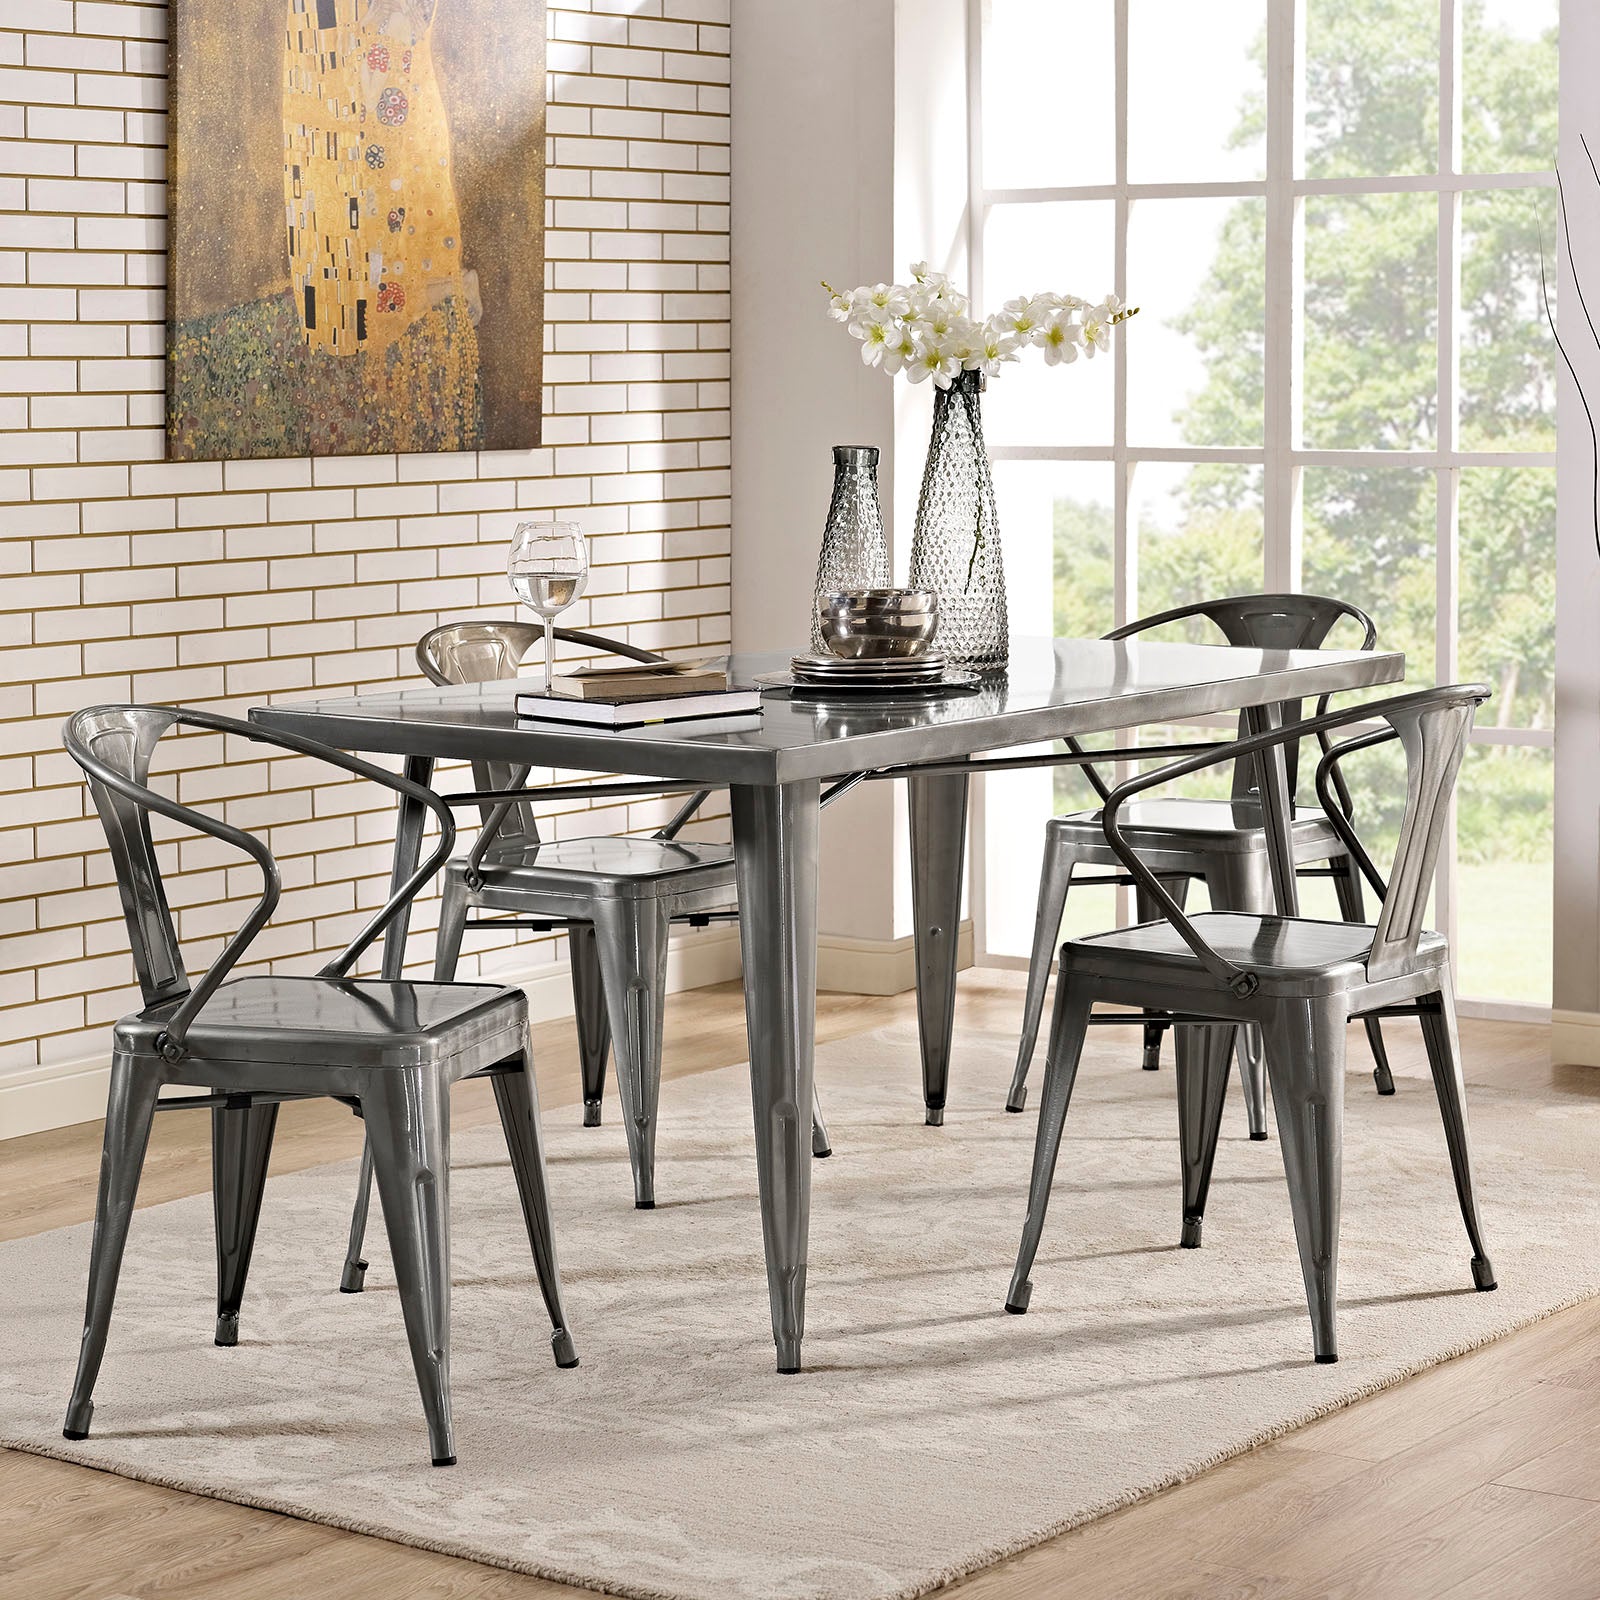 Alacrity Rectangle Metal Dining Table - East Shore Modern Home Furnishings